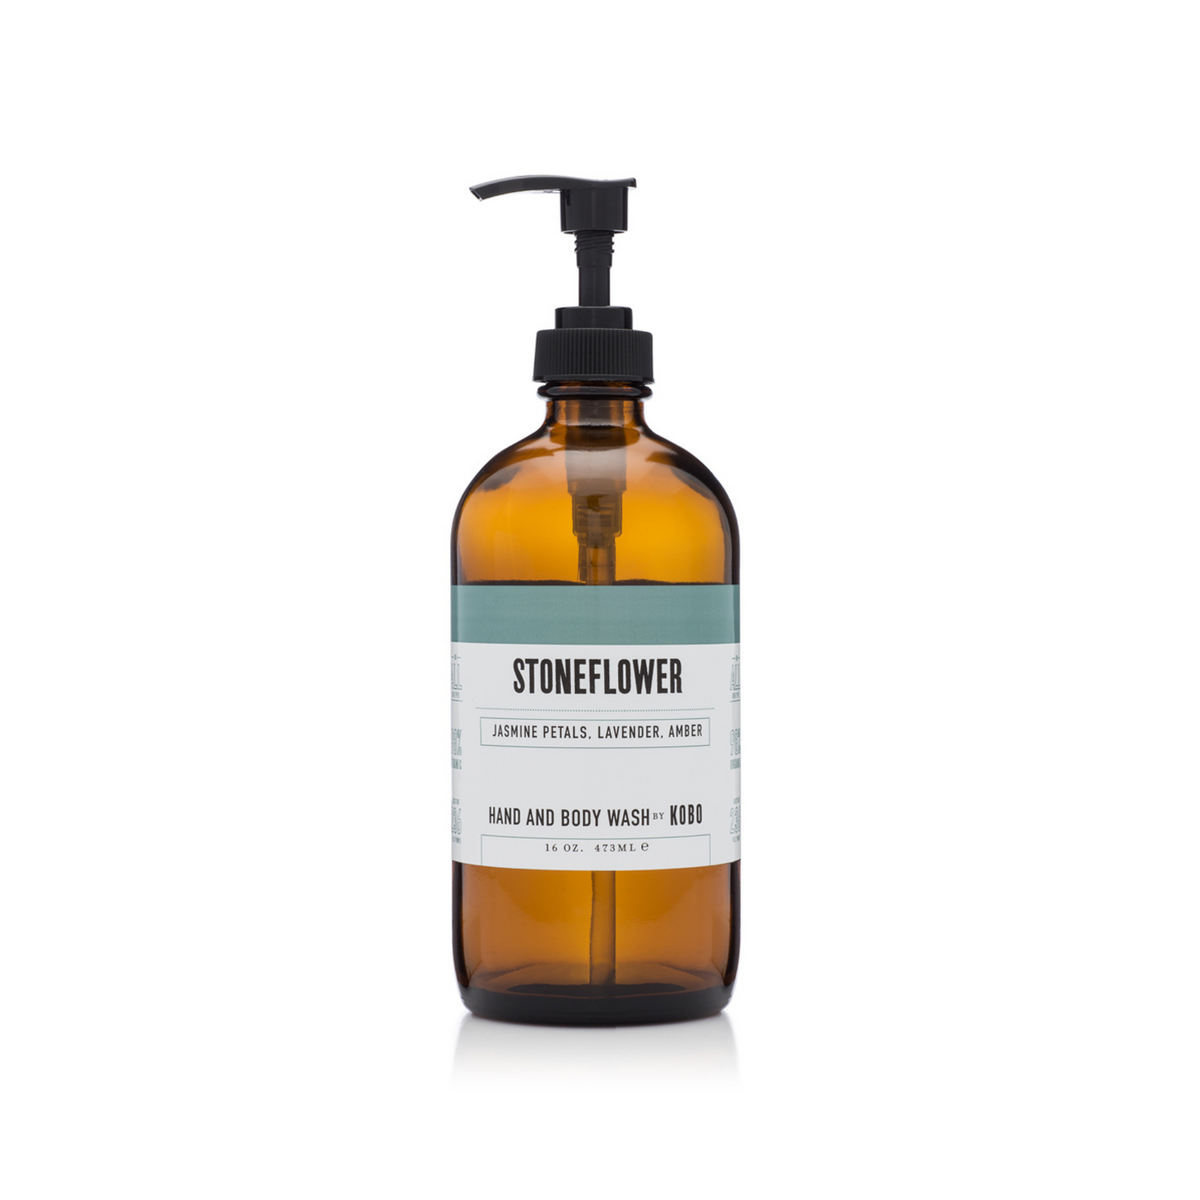 Primary Image of Stoneflower Hand and Body Wash